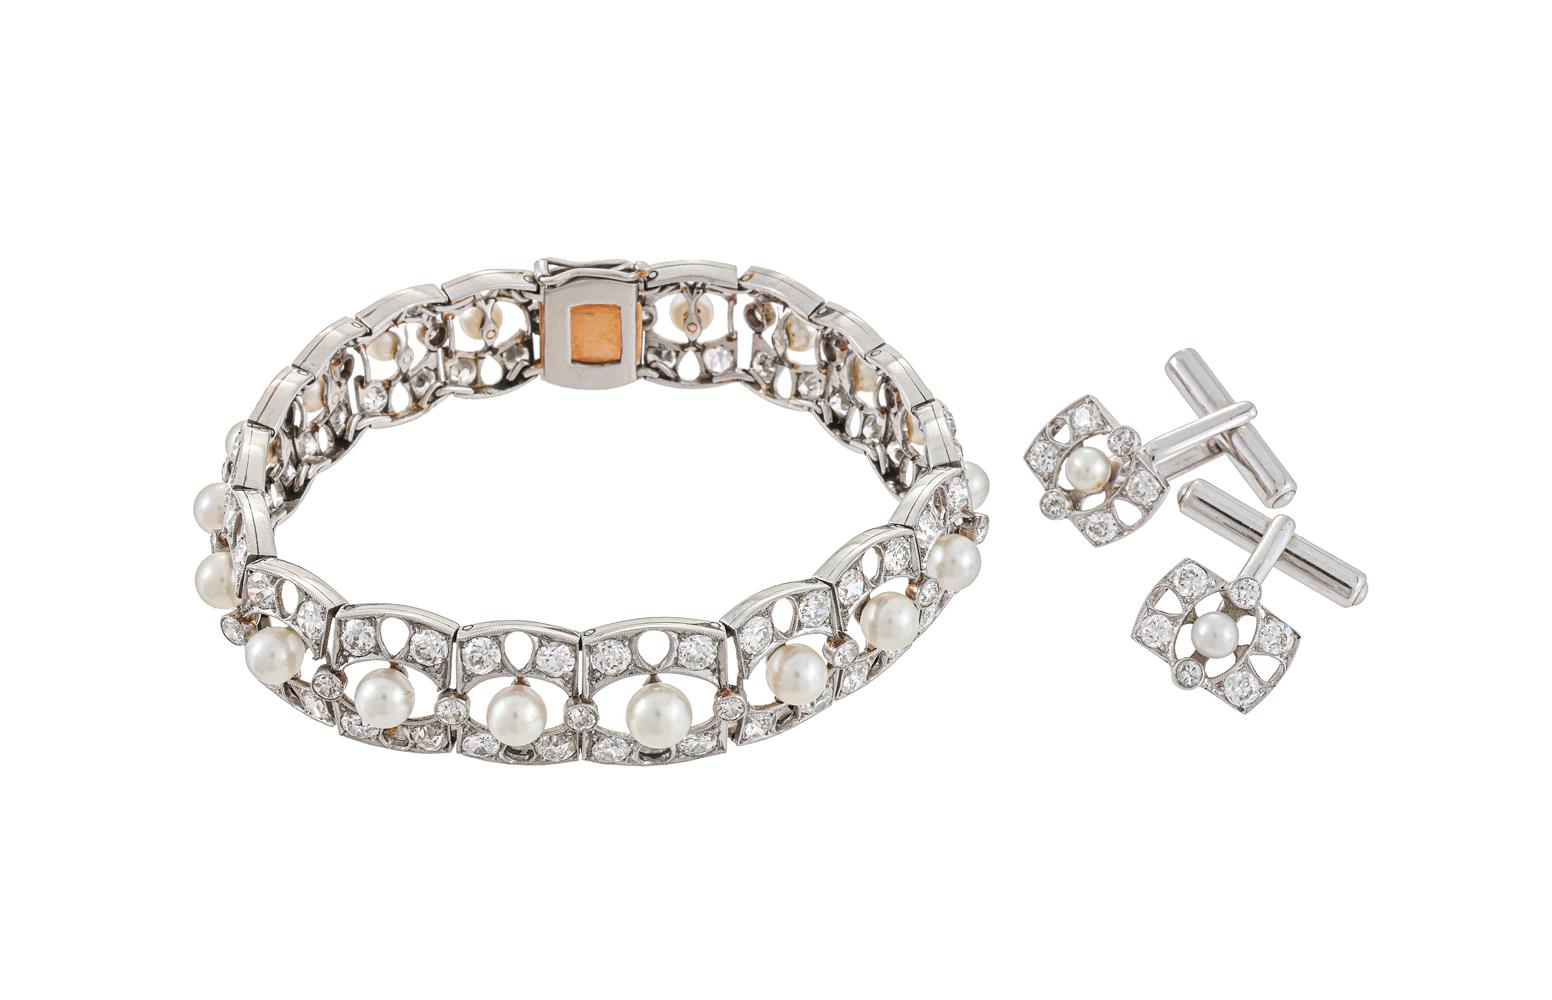 A 1930S DIAMOND AND CULTURED PEARL BRACELET - Image 2 of 2